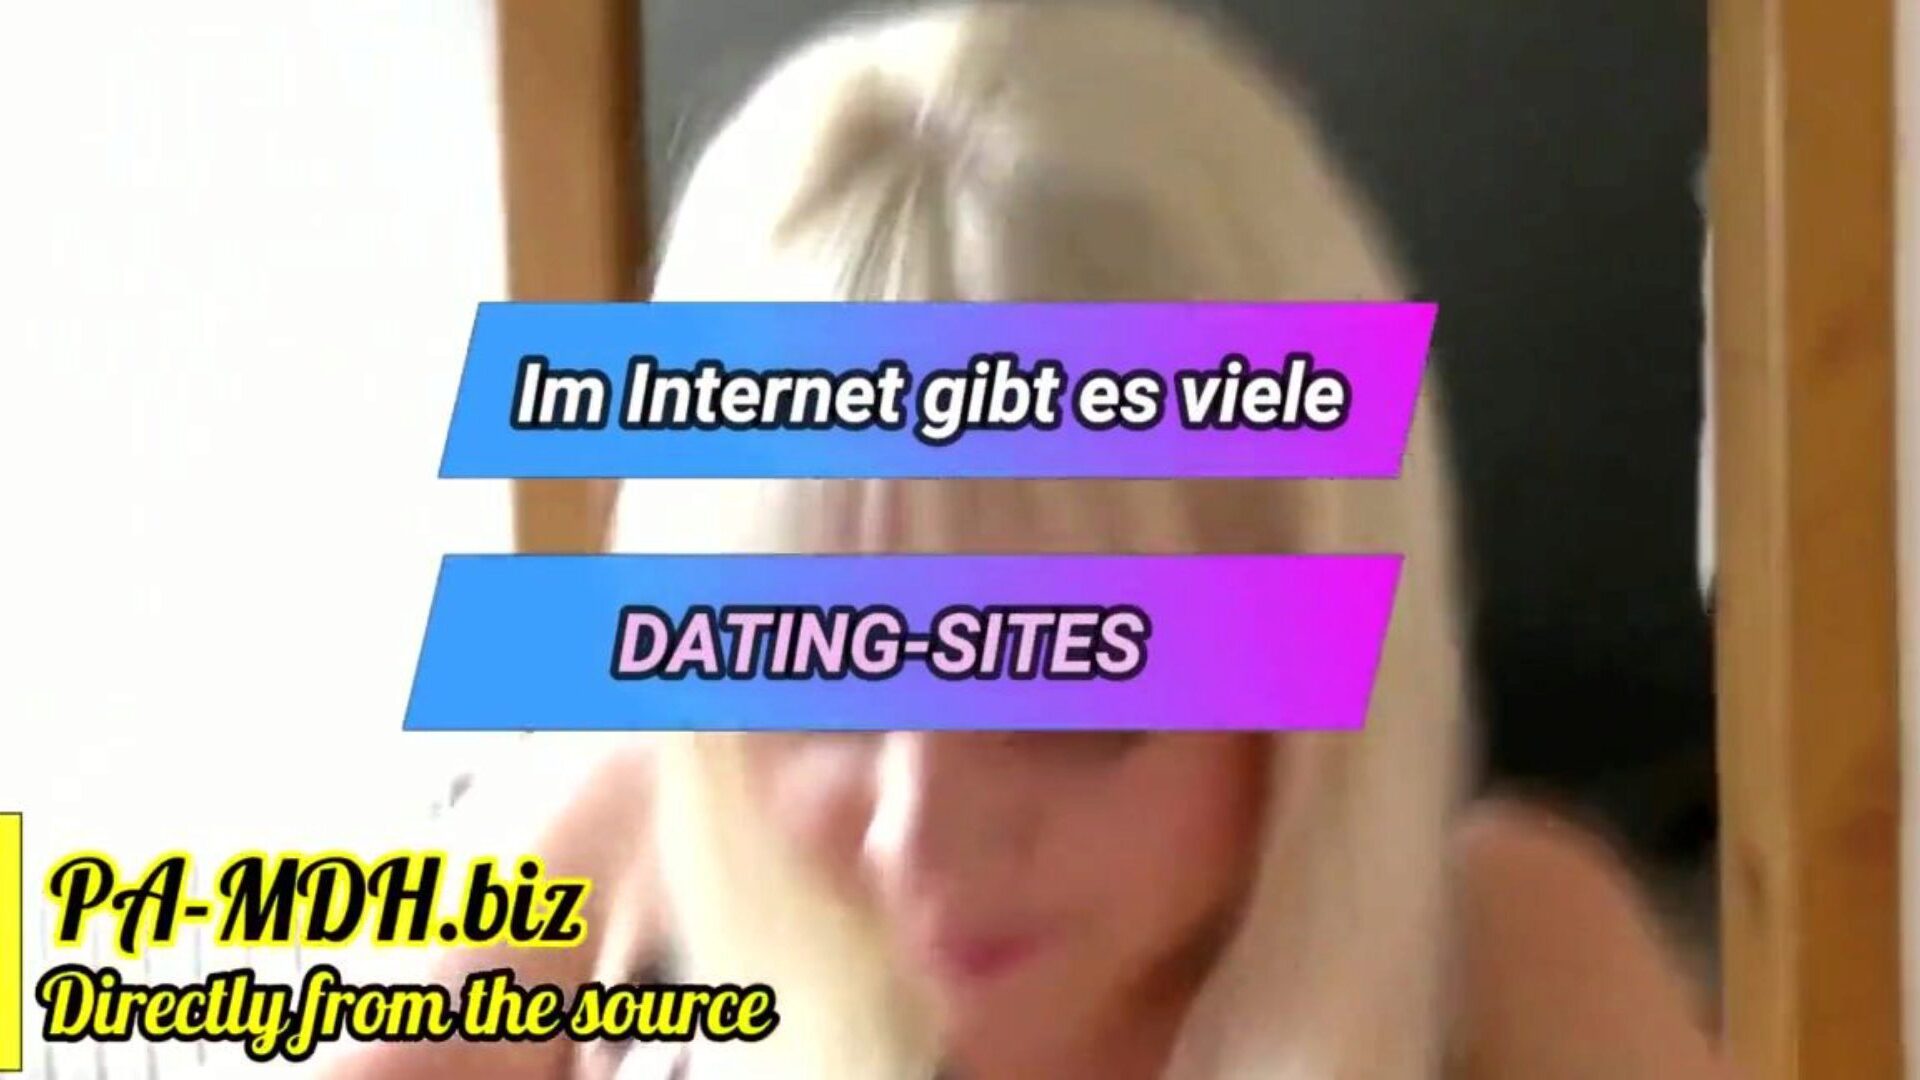 stiefbruder fickt meine titten und fingert mich: hd porno 45 watch stiefbruder fickt meine titten und fingert mich video on xhamster - the ultimate archive of free-for-all german new beeg tube hd hard-core pornography tube videos